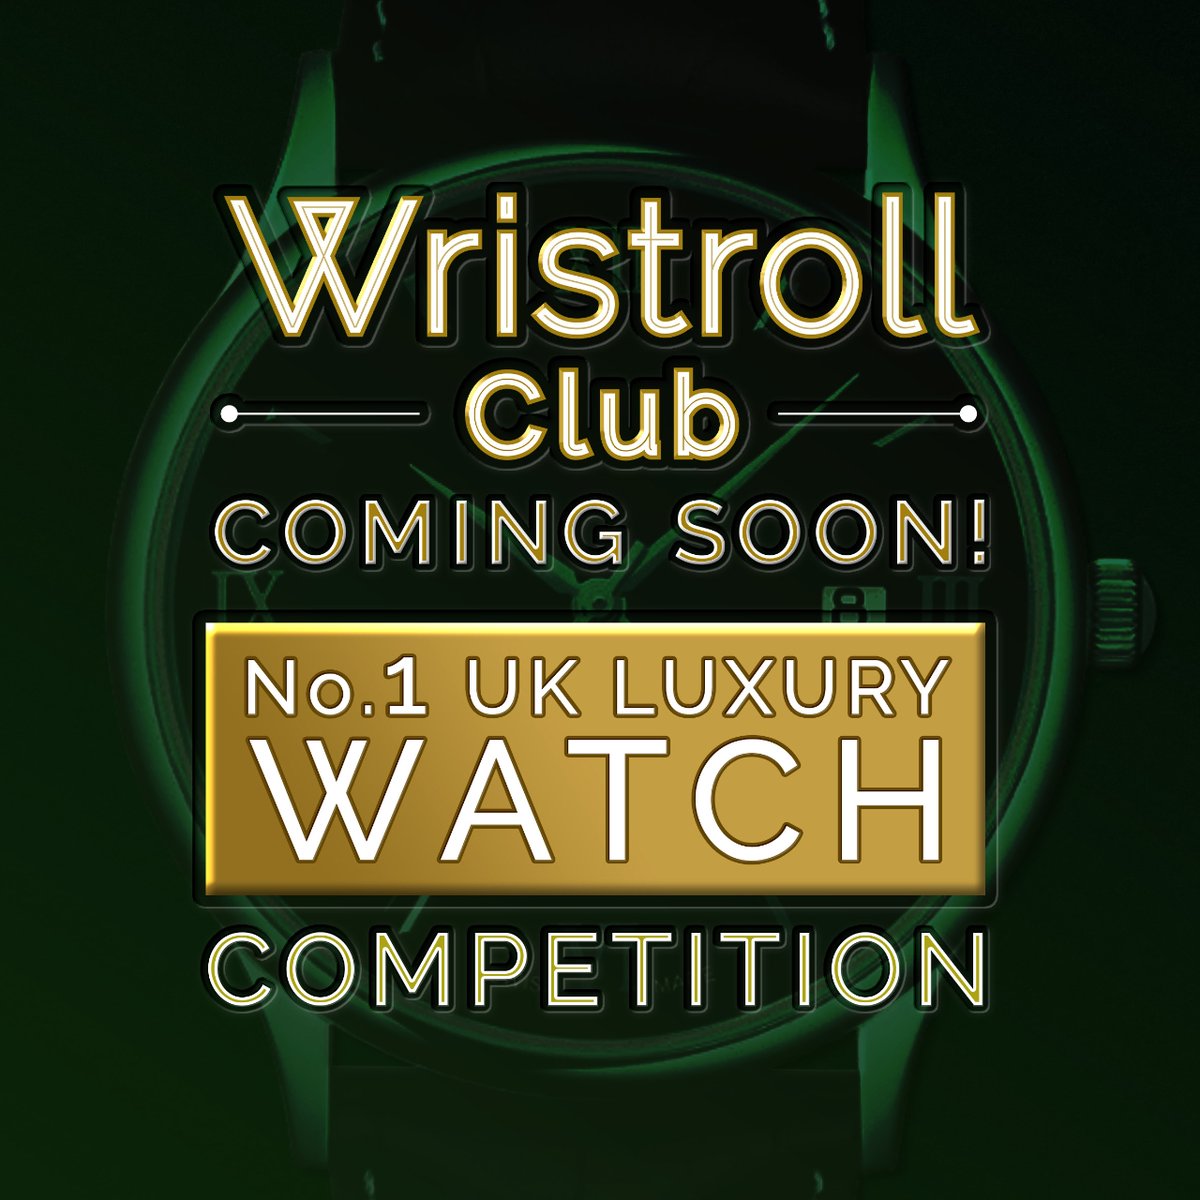 Are you as excited as us? Soon the Wristroll Club will be giving away luxury watches to members of our community! Subscribe via our website for the latest updates. 
#watches #wristroll #cars #london #uk